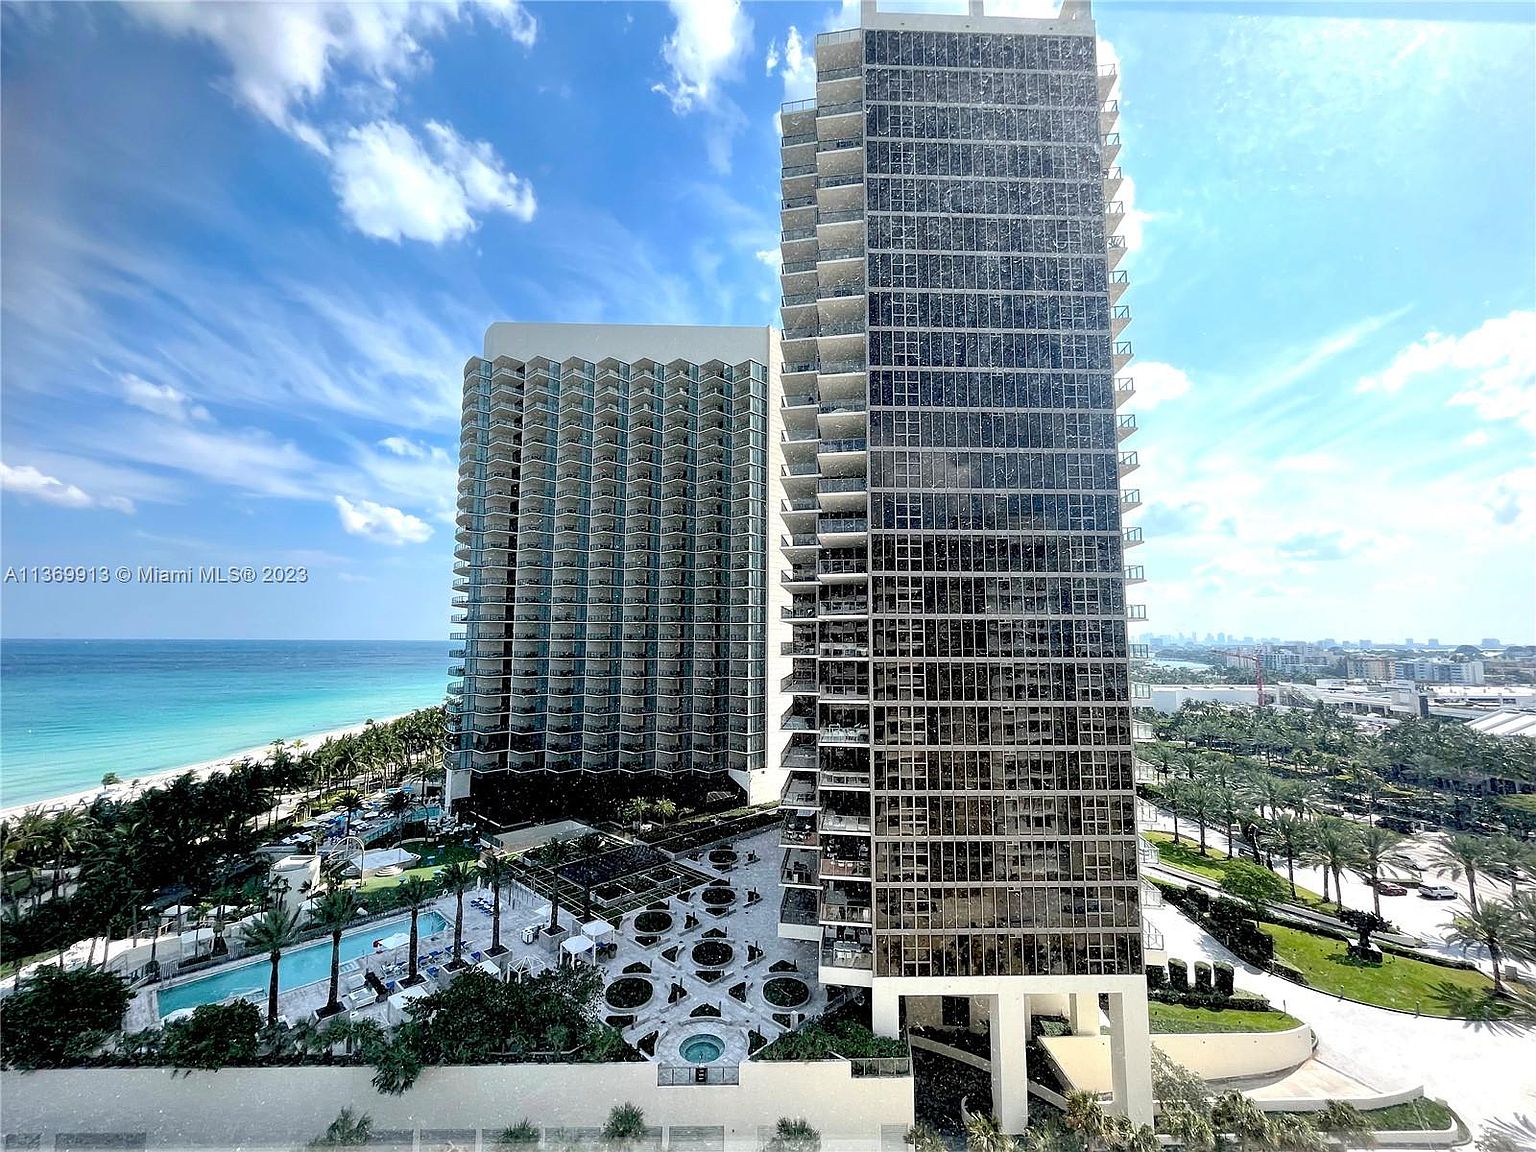 9801 Collins Ave APT 16W, Bal Harbour, FL 33154 | Zillow